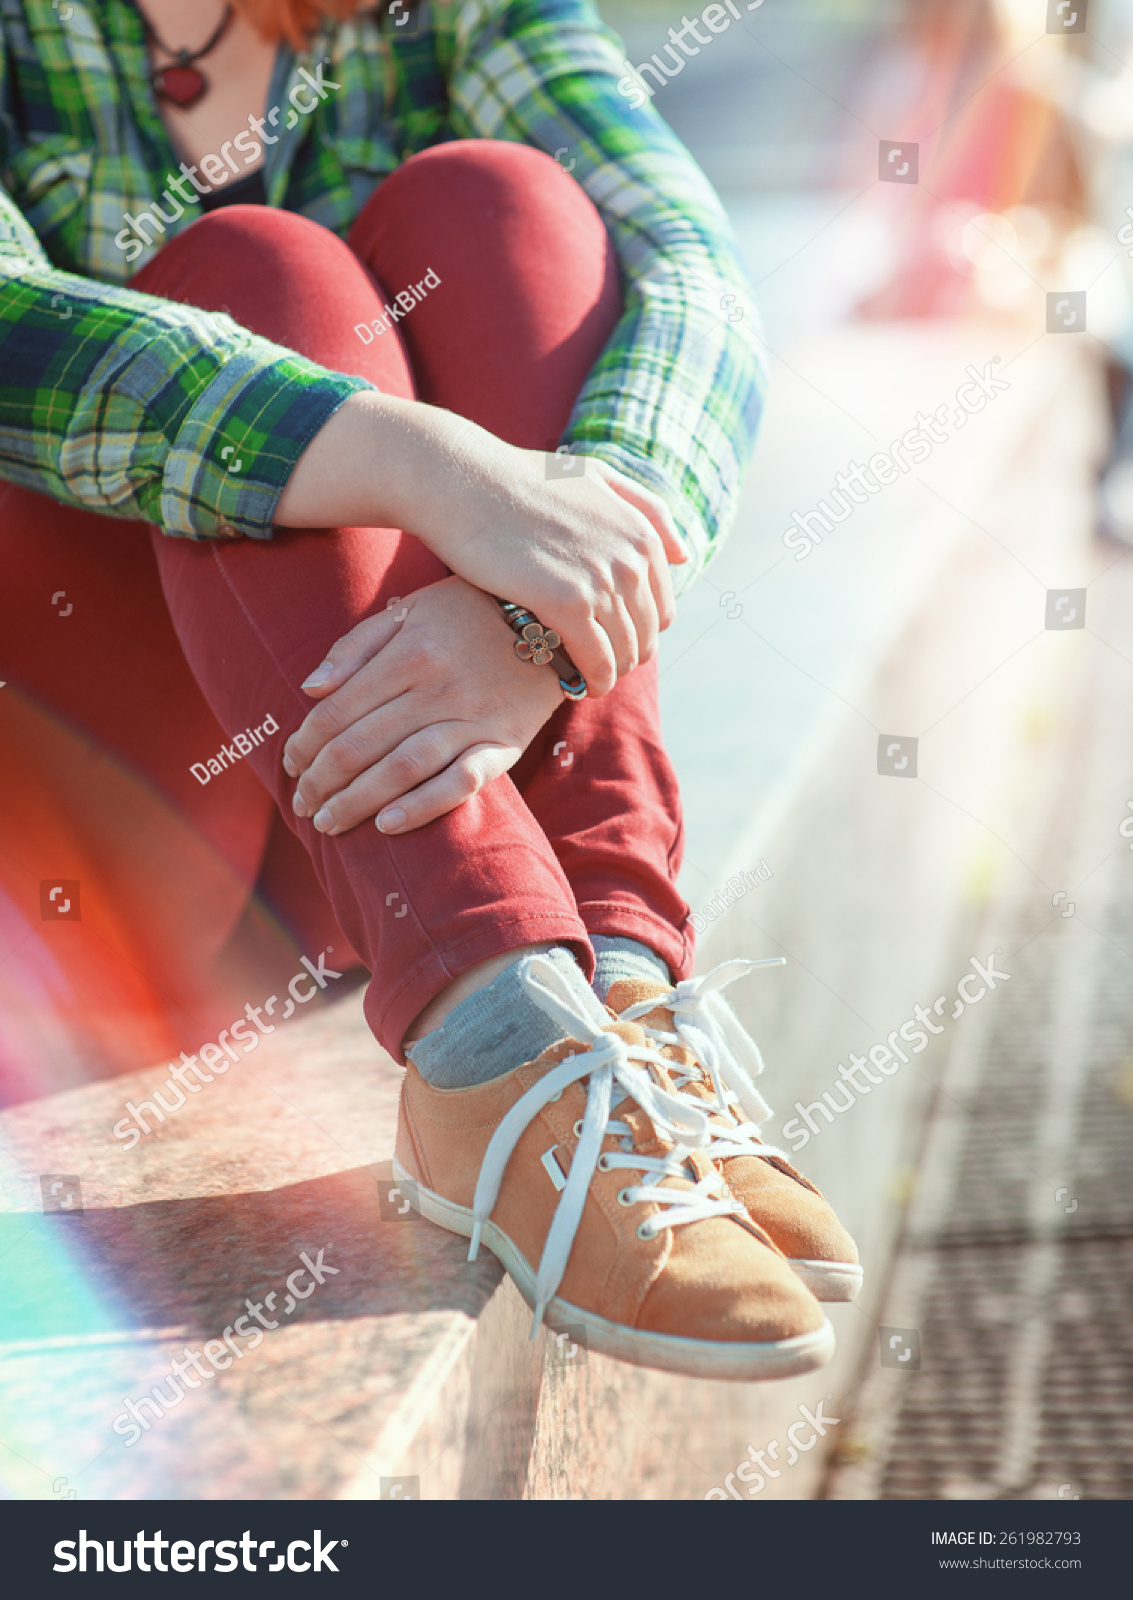 Yellow Sneakers On Girl Legs Hipster Stock Photo 261982793 - Shutterstock